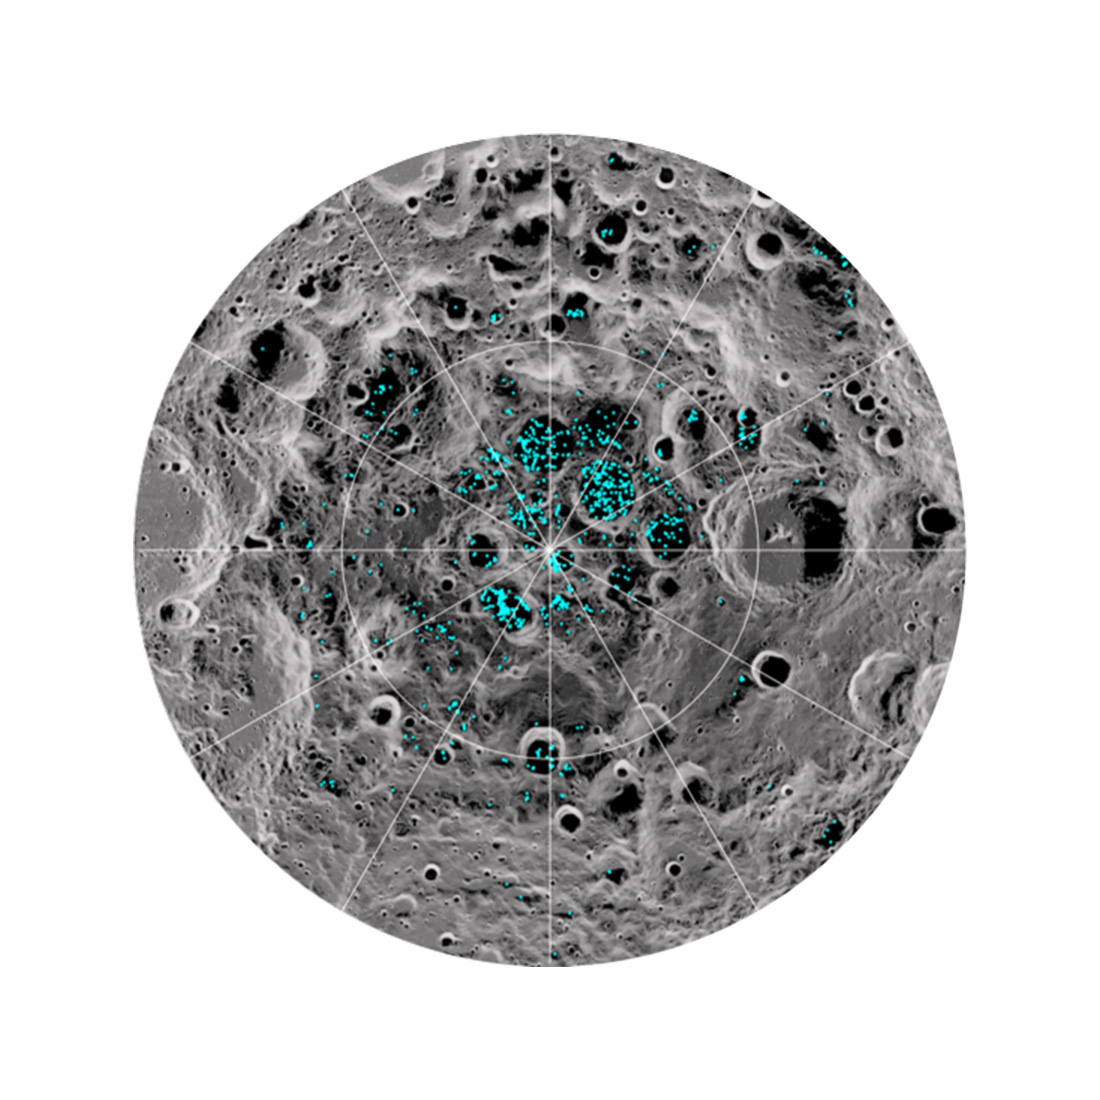 plotted over an image of the lunar surface.